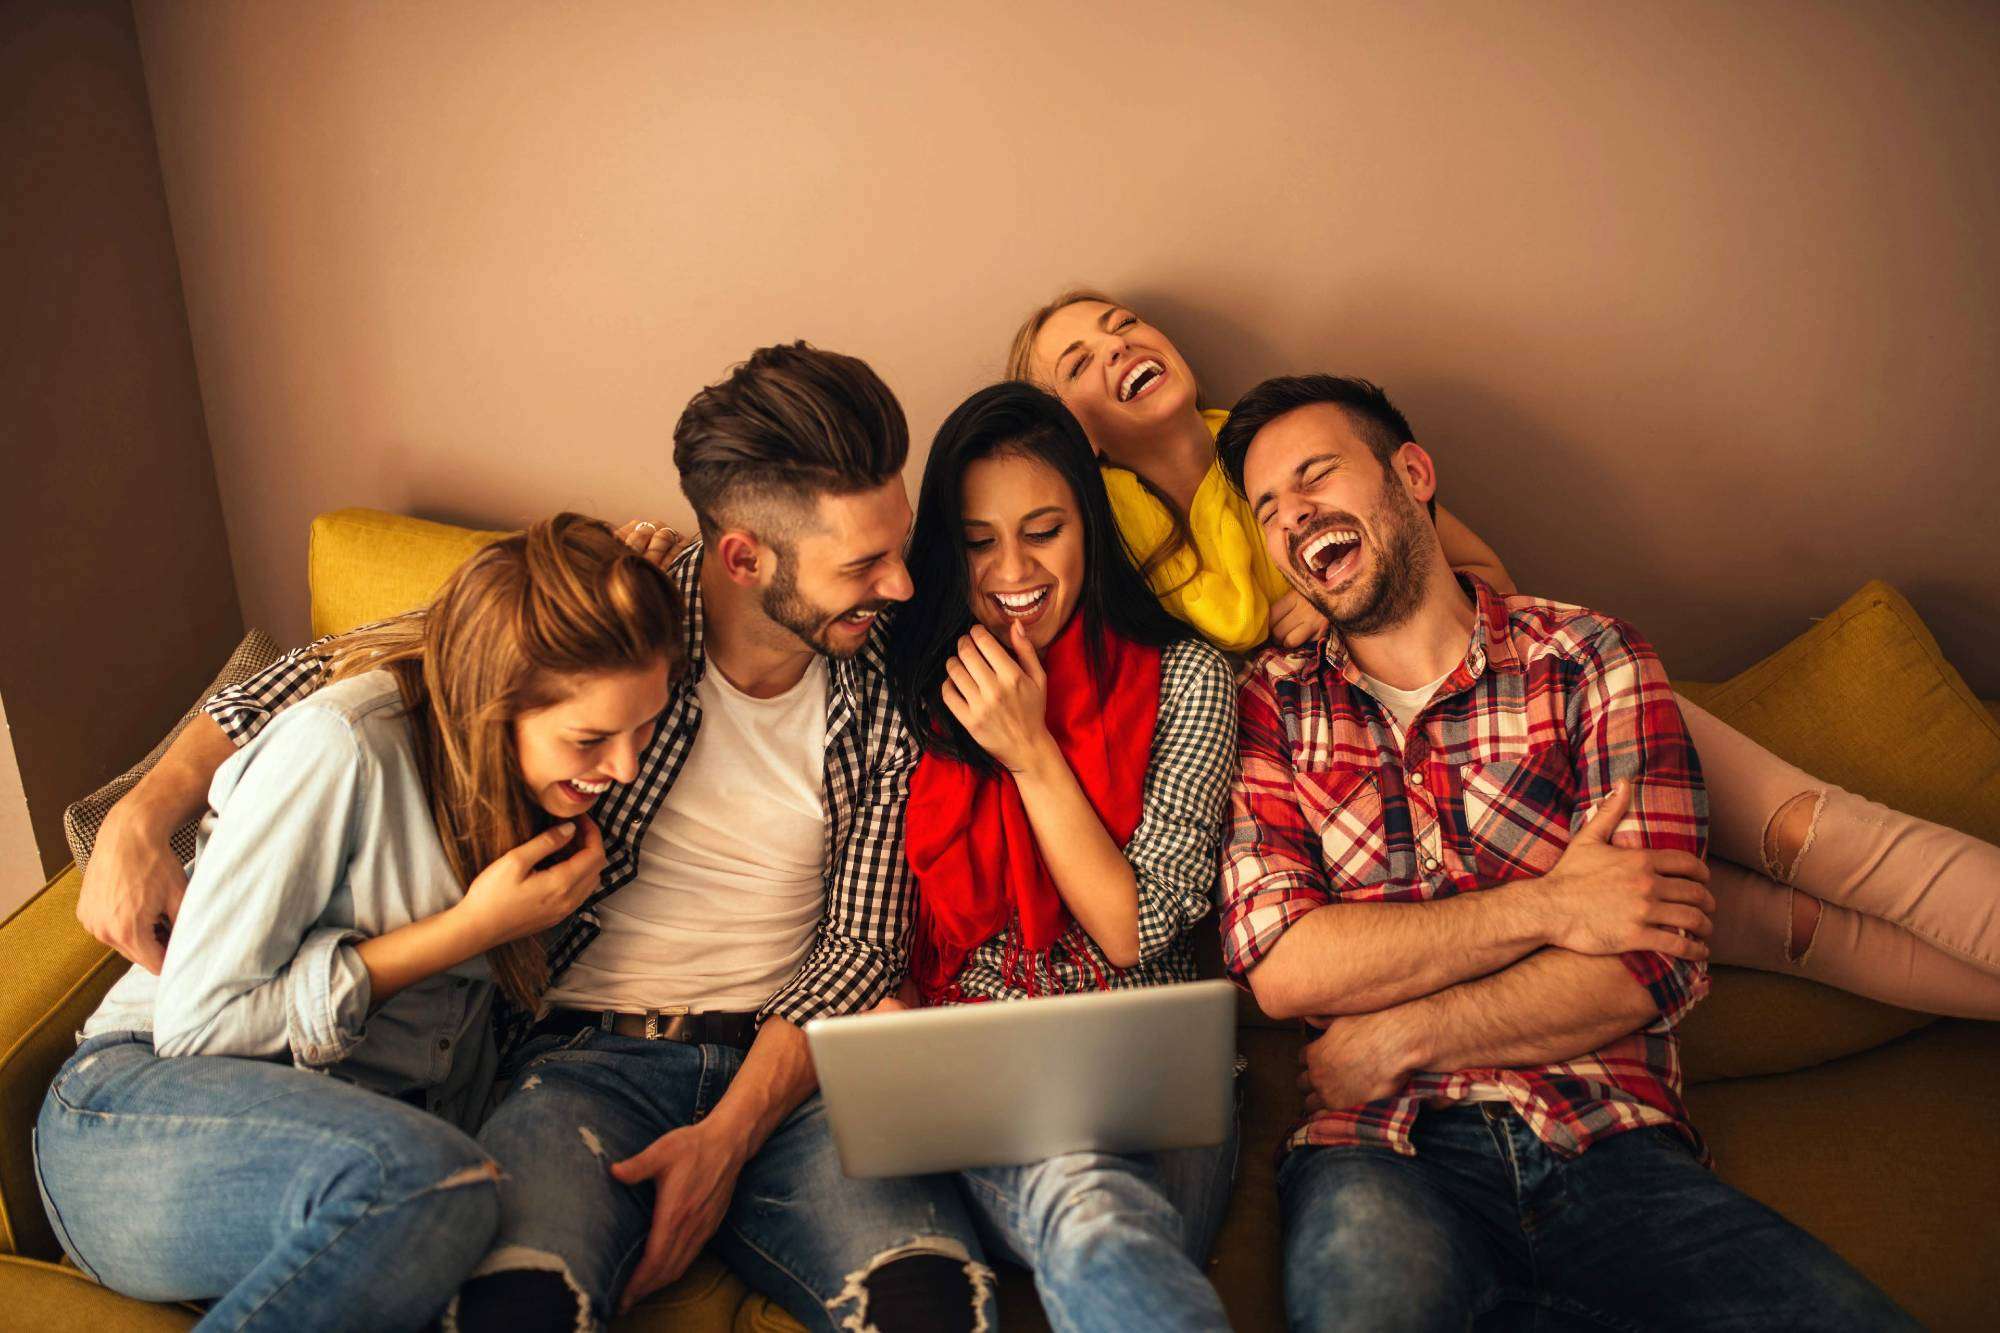 Laughing Group Of Young Adults Looking At Laptop On Couch